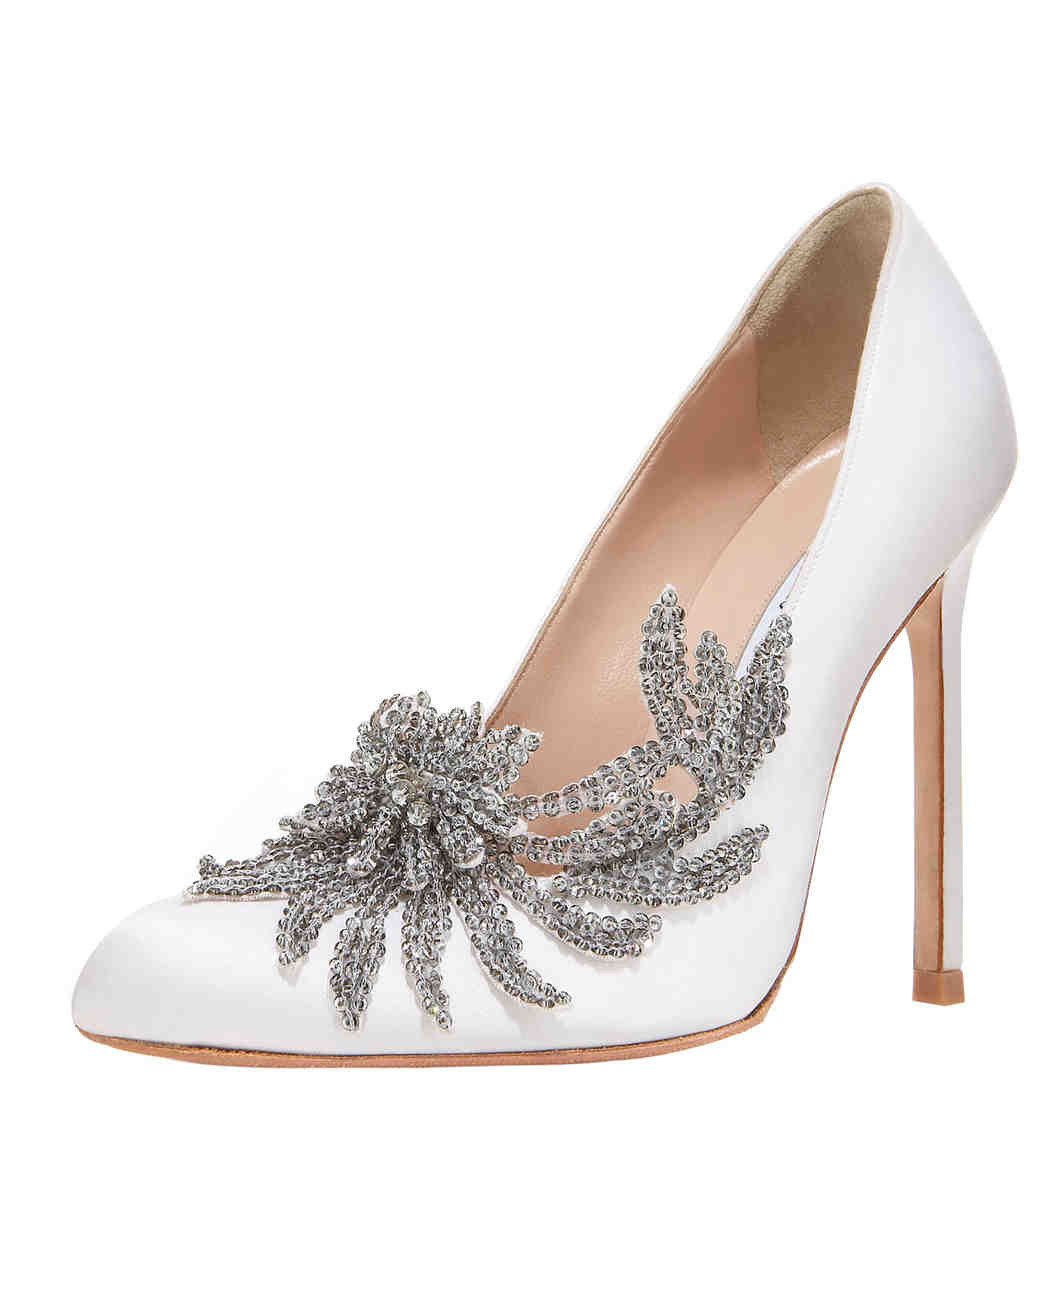 Bride Shoes Wedding
 36 Best Shoes for a Bride to Wear to a Fall Wedding